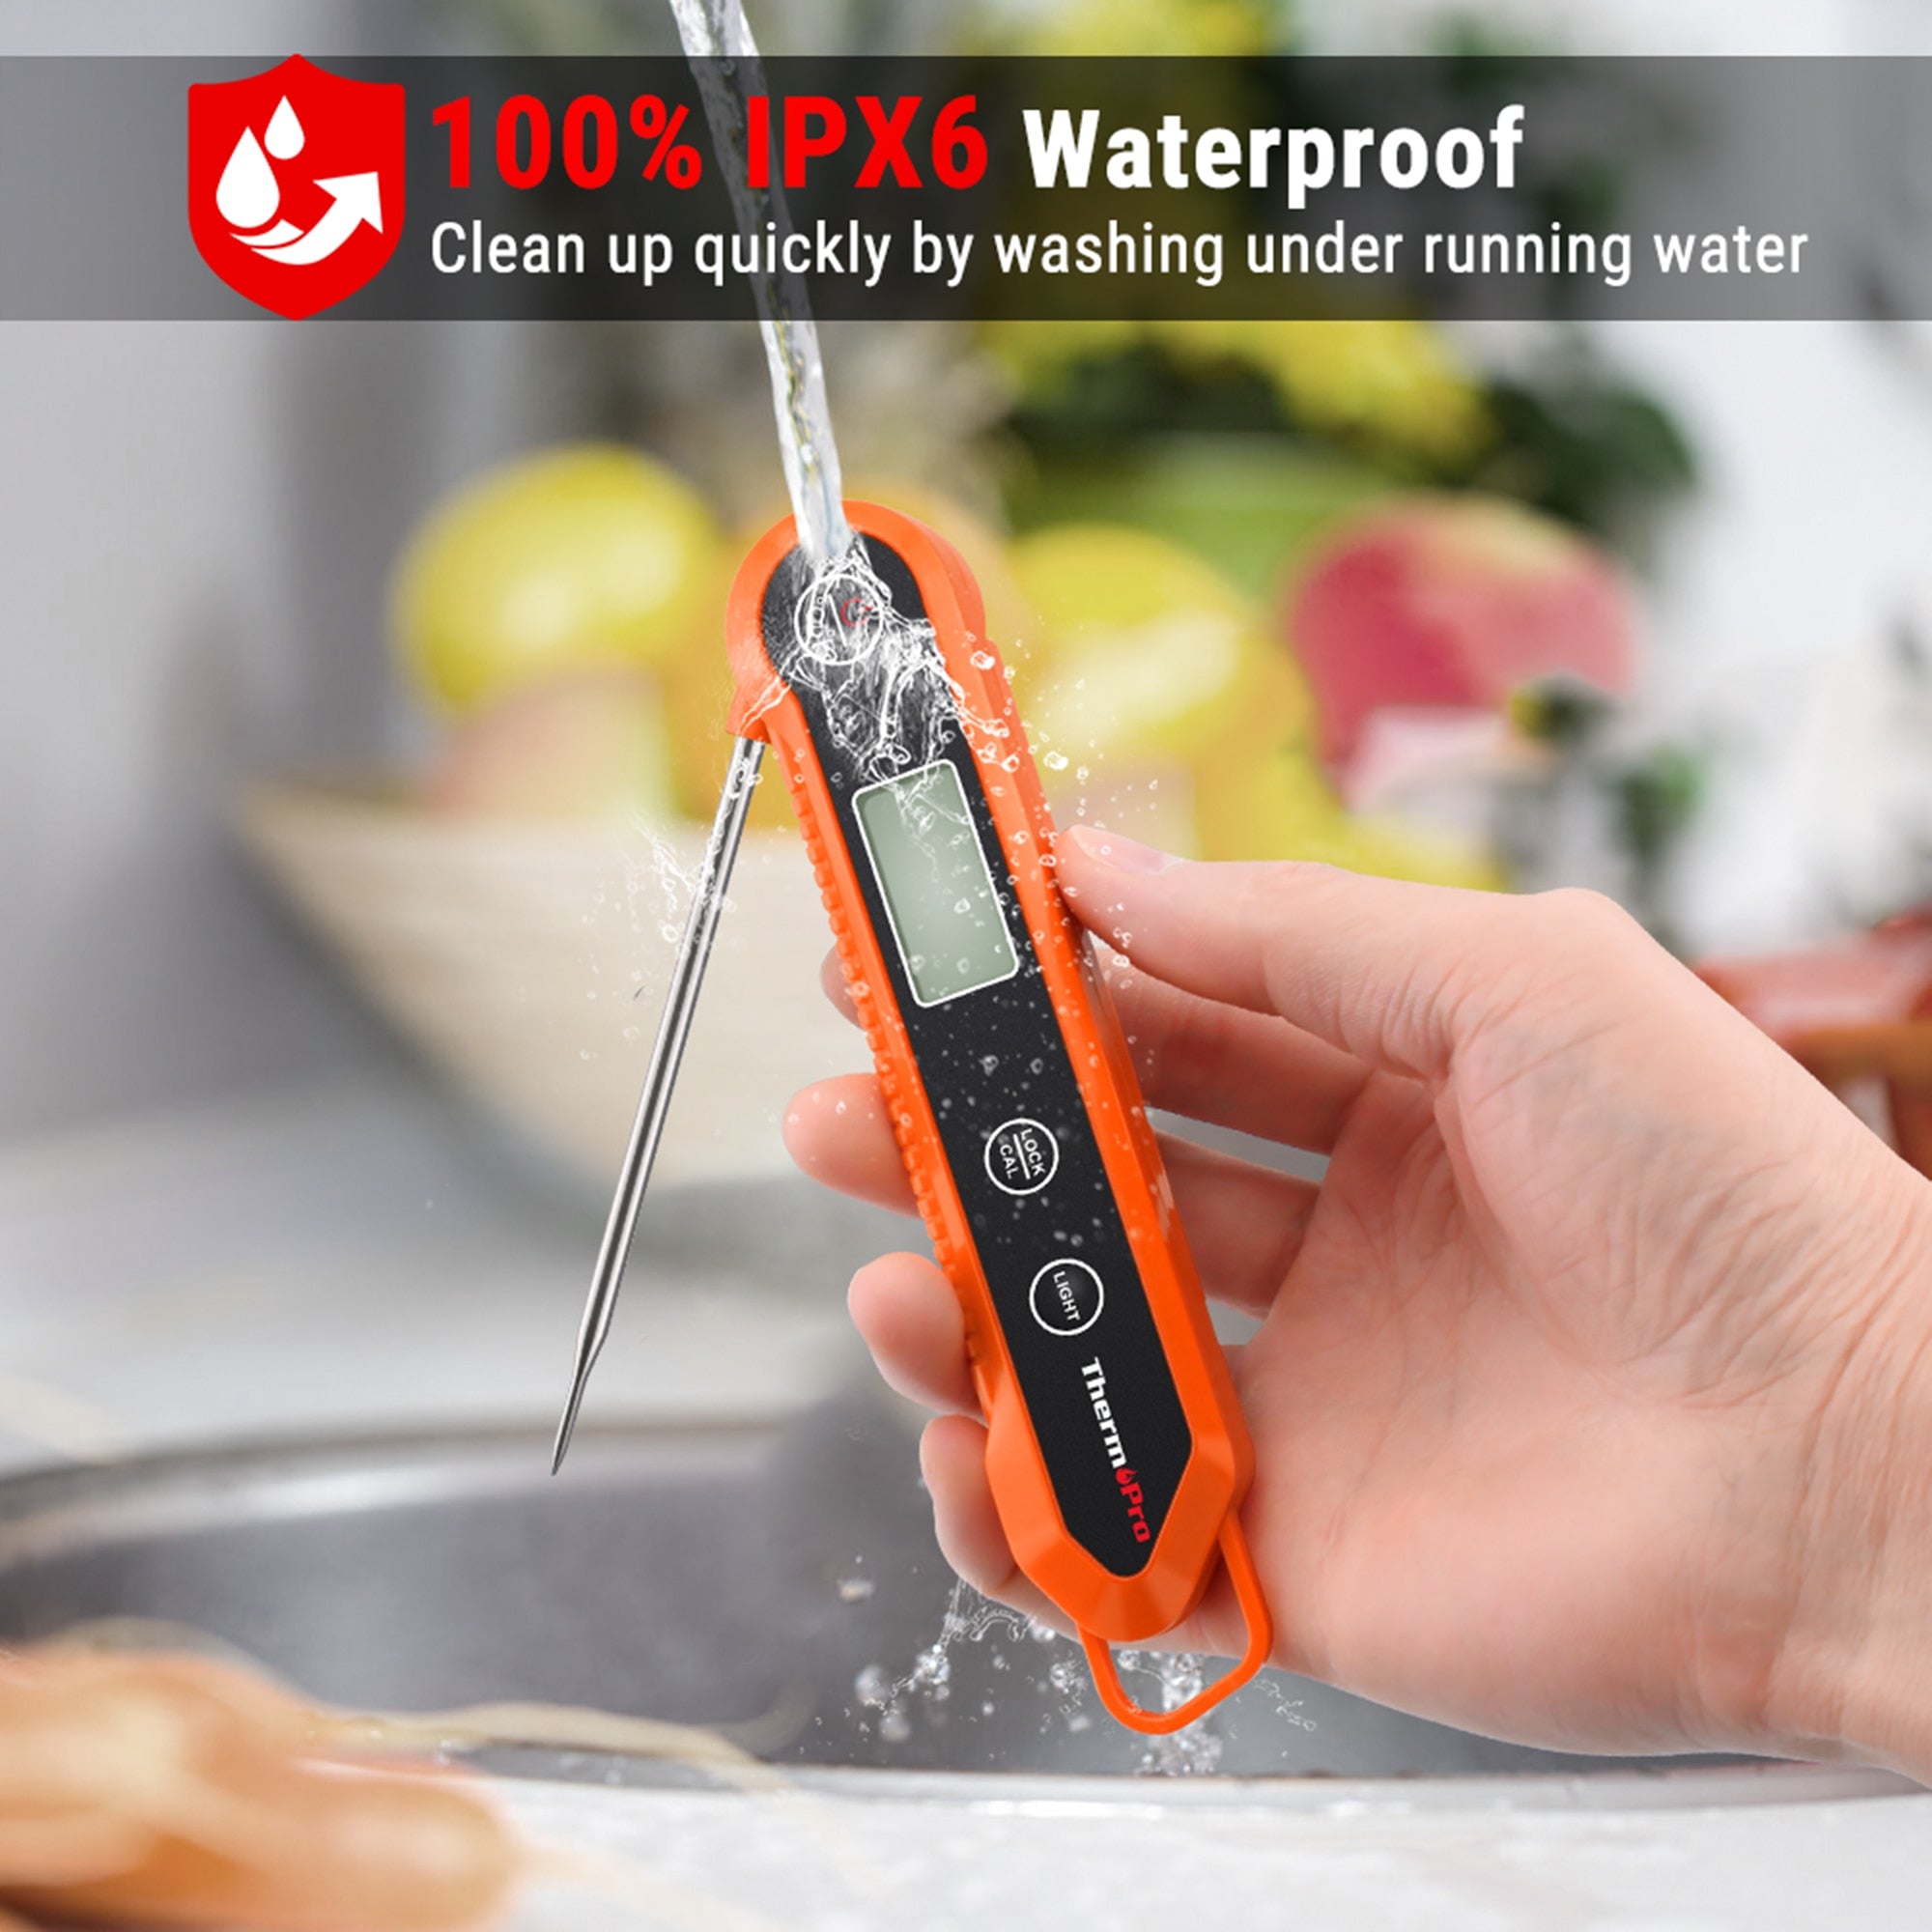 ThermoPro TP01H Digital Instant Read Meat Thermometer For Cooking,Grilling  & BBQ